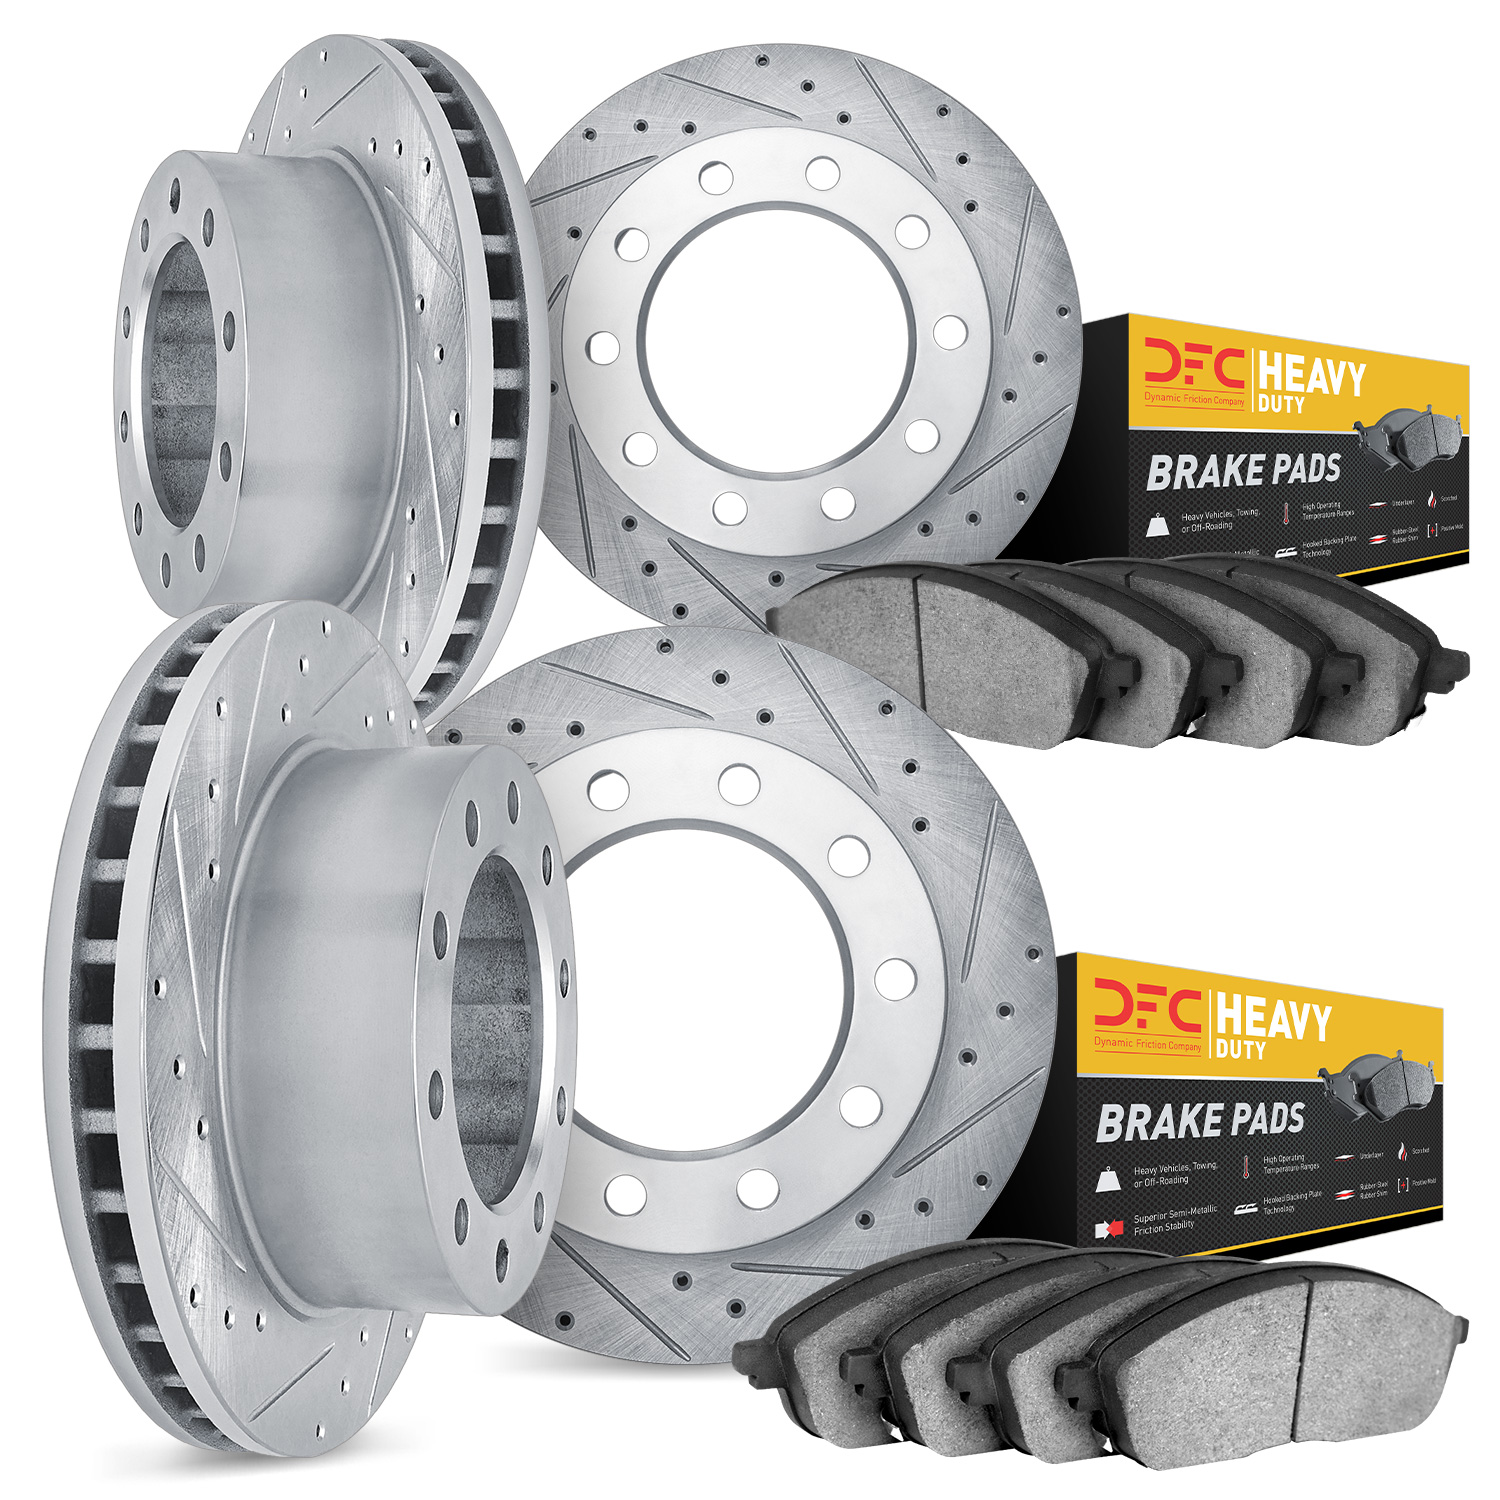 7204-99057 Drilled/Slotted Rotors w/Heavy-Duty Brake Pads Kit [Silver], 1999-2004 Ford/Lincoln/Mercury/Mazda, Position: Front an